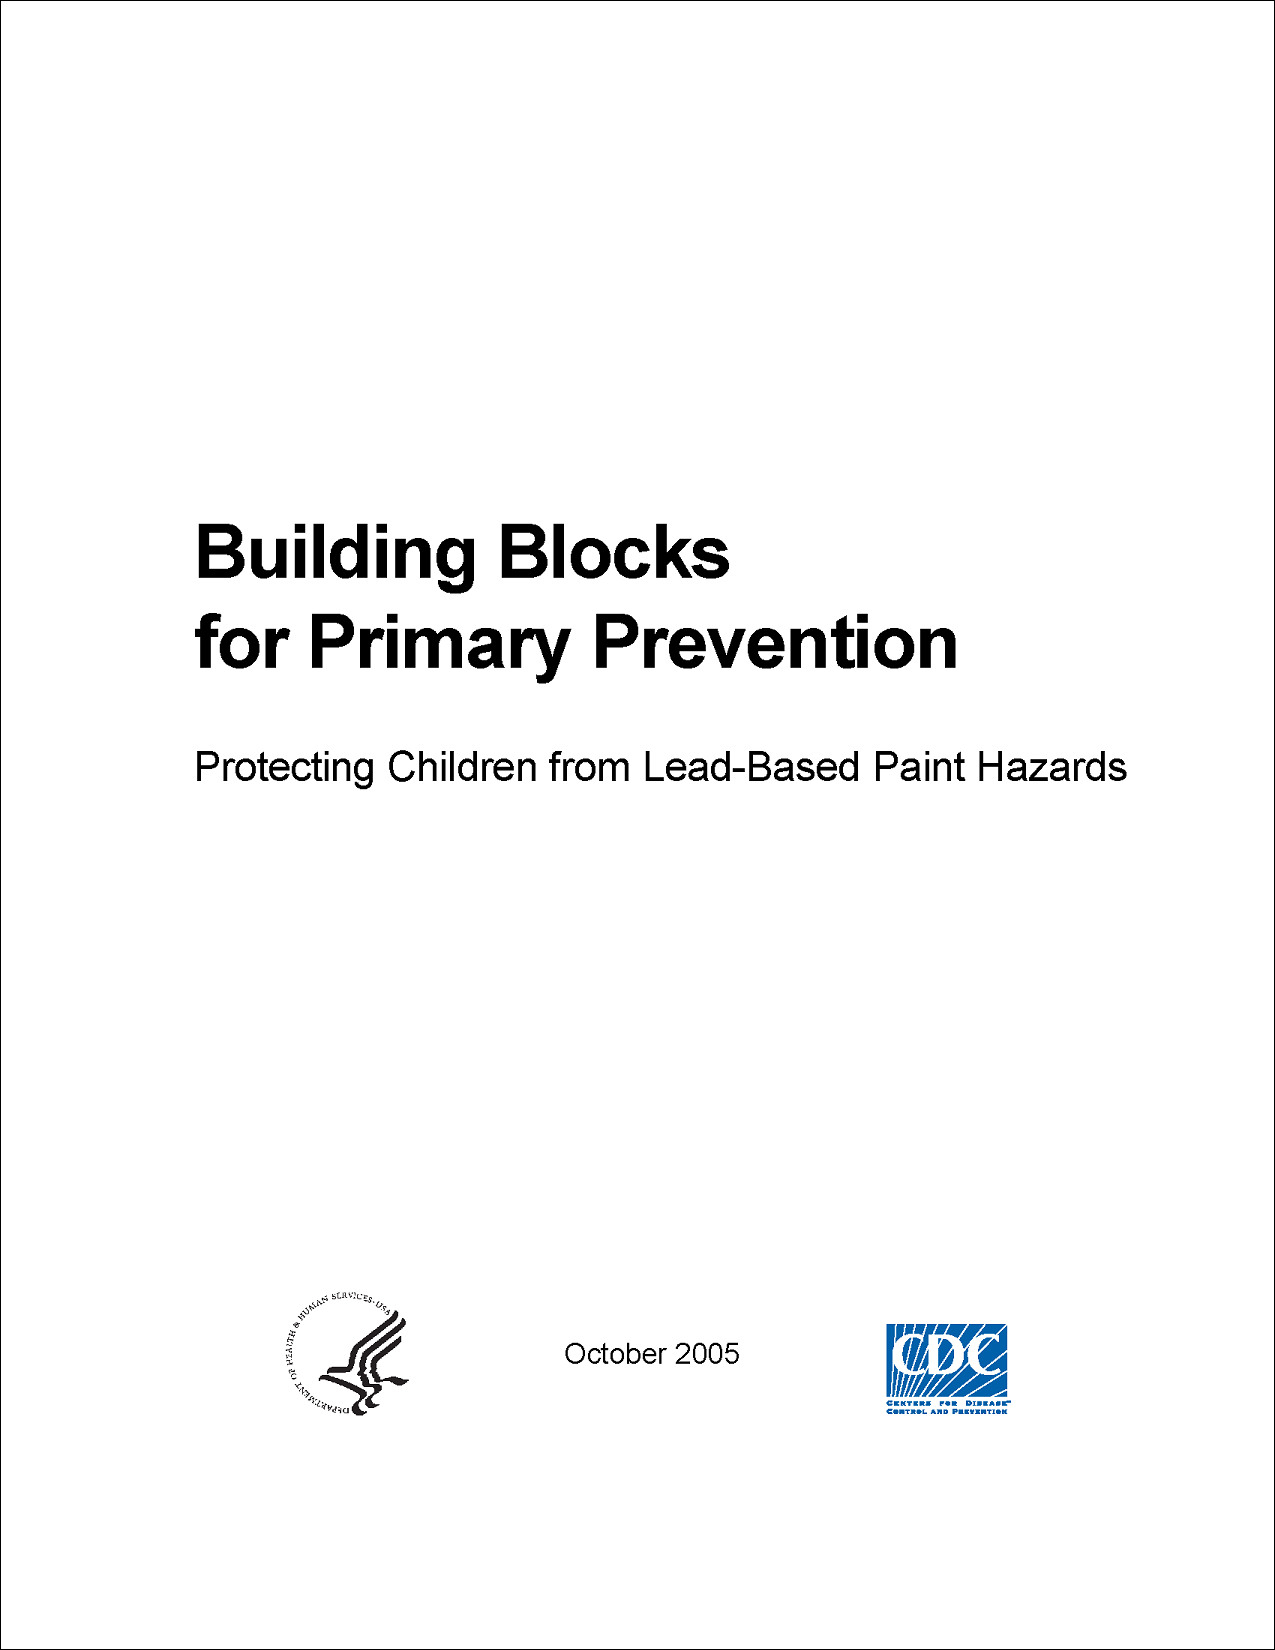 AFHH - Building Blocks for Primary Prevention